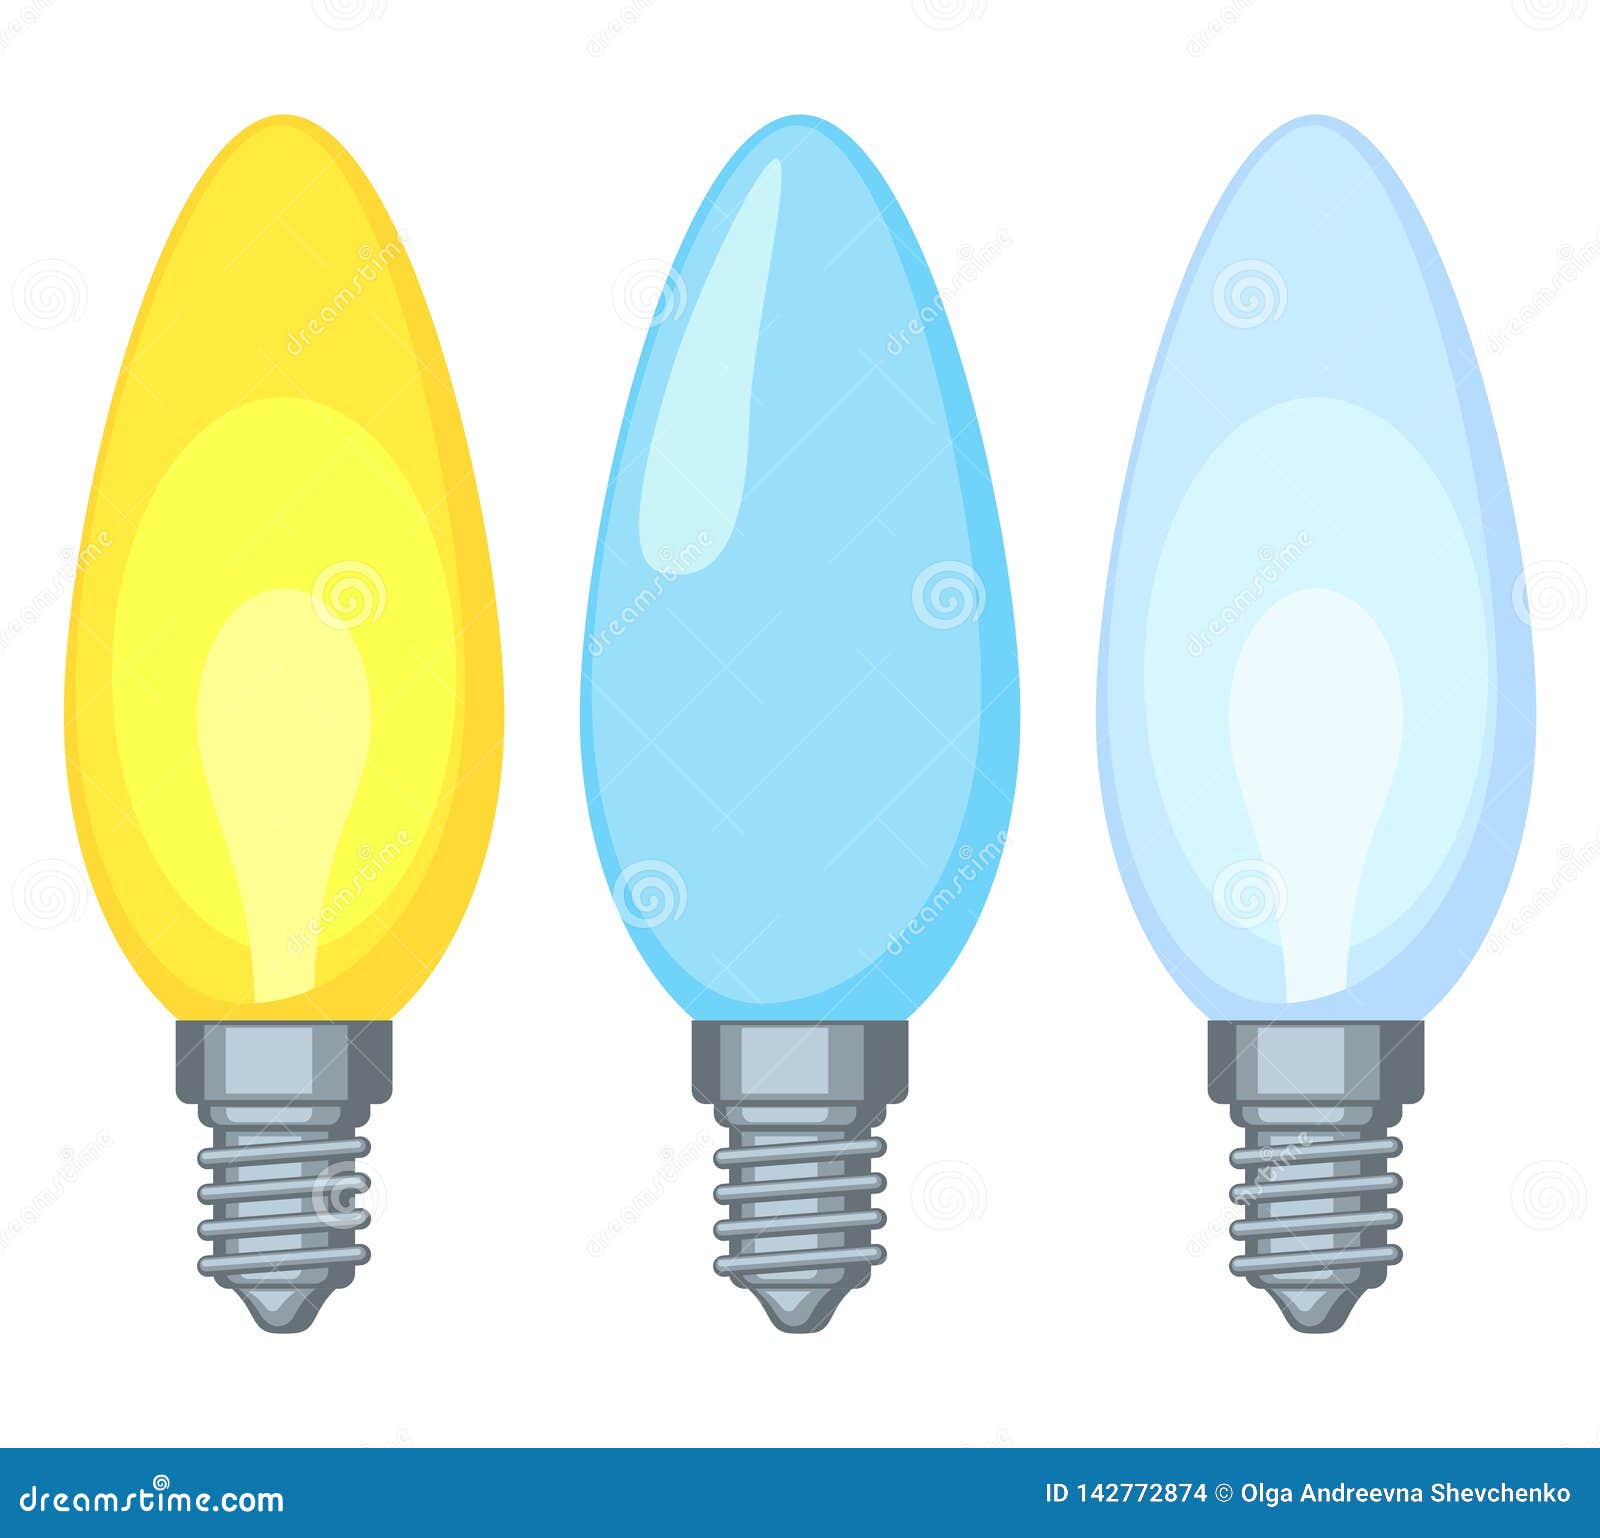 Cartoon Warm and Cold Candle Light Bulb Set Stock Vector - Illustration ...